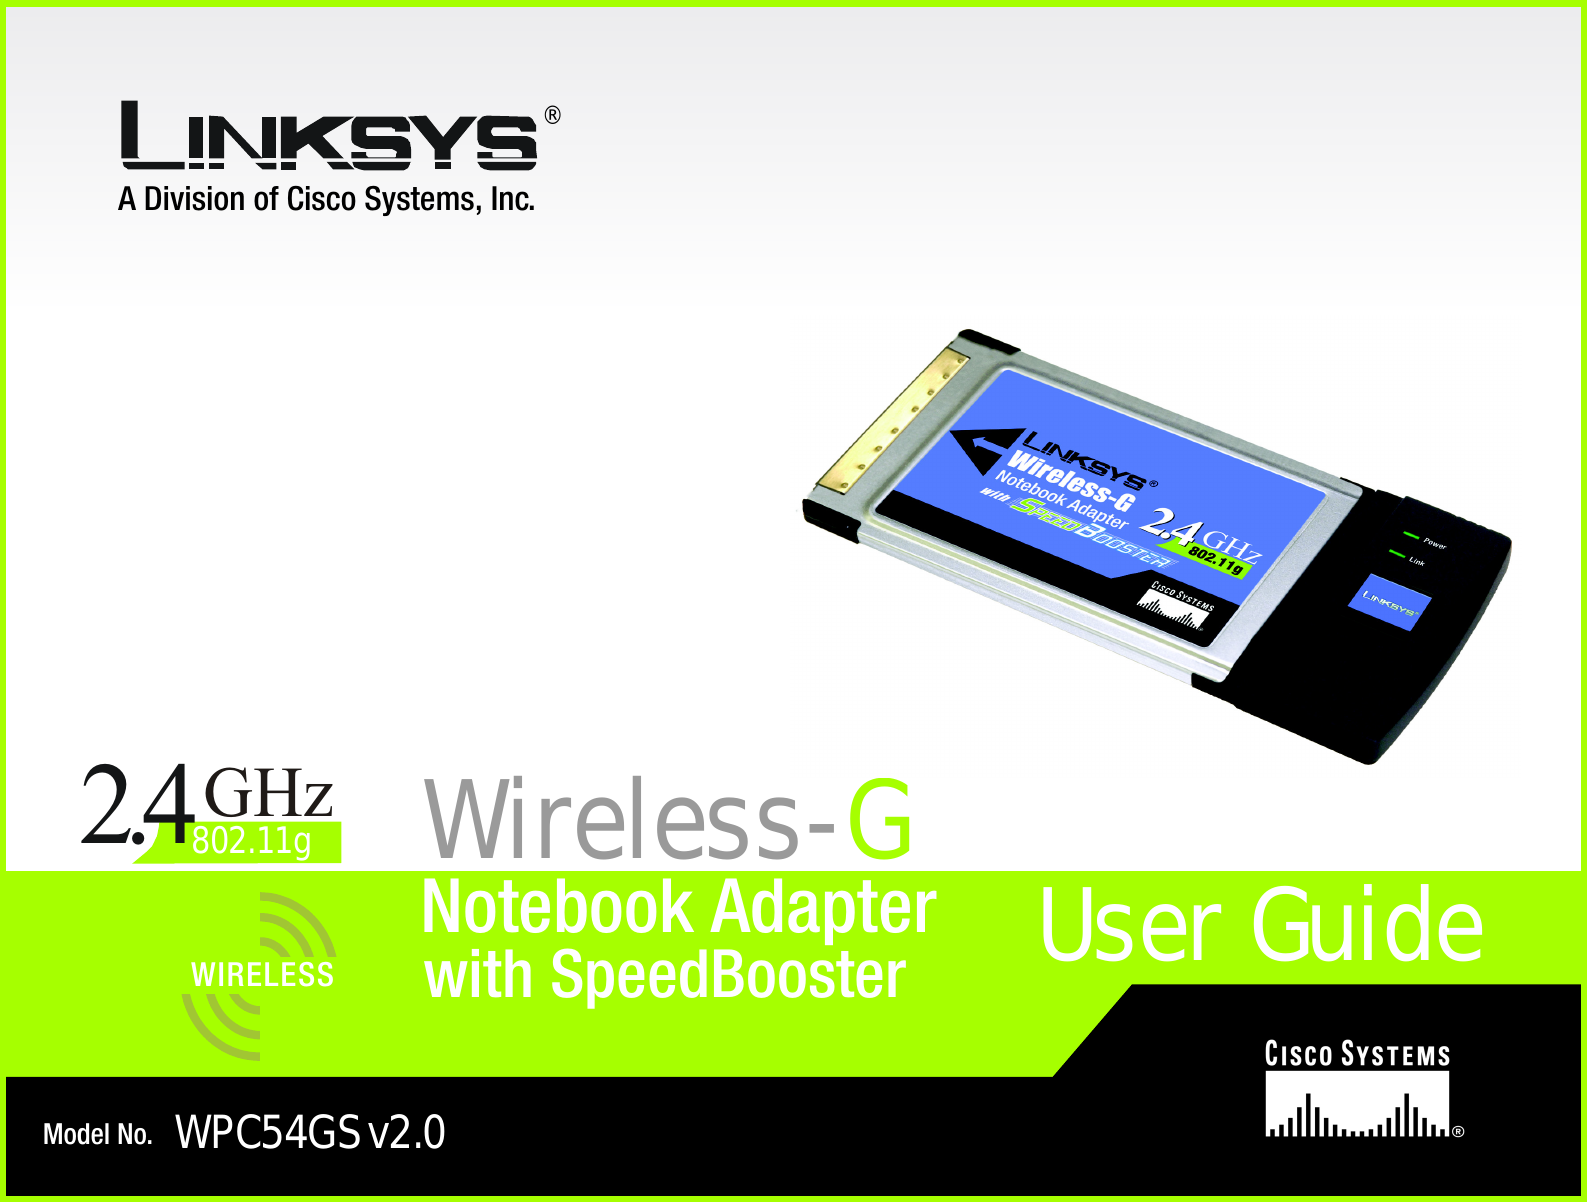 A Division of Cisco Systems, Inc.®Model No.Notebook AdapterWireless-GWPC54GS v2.0User GuideWIRELESSGHz2.4802.11gwith SpeedBooster